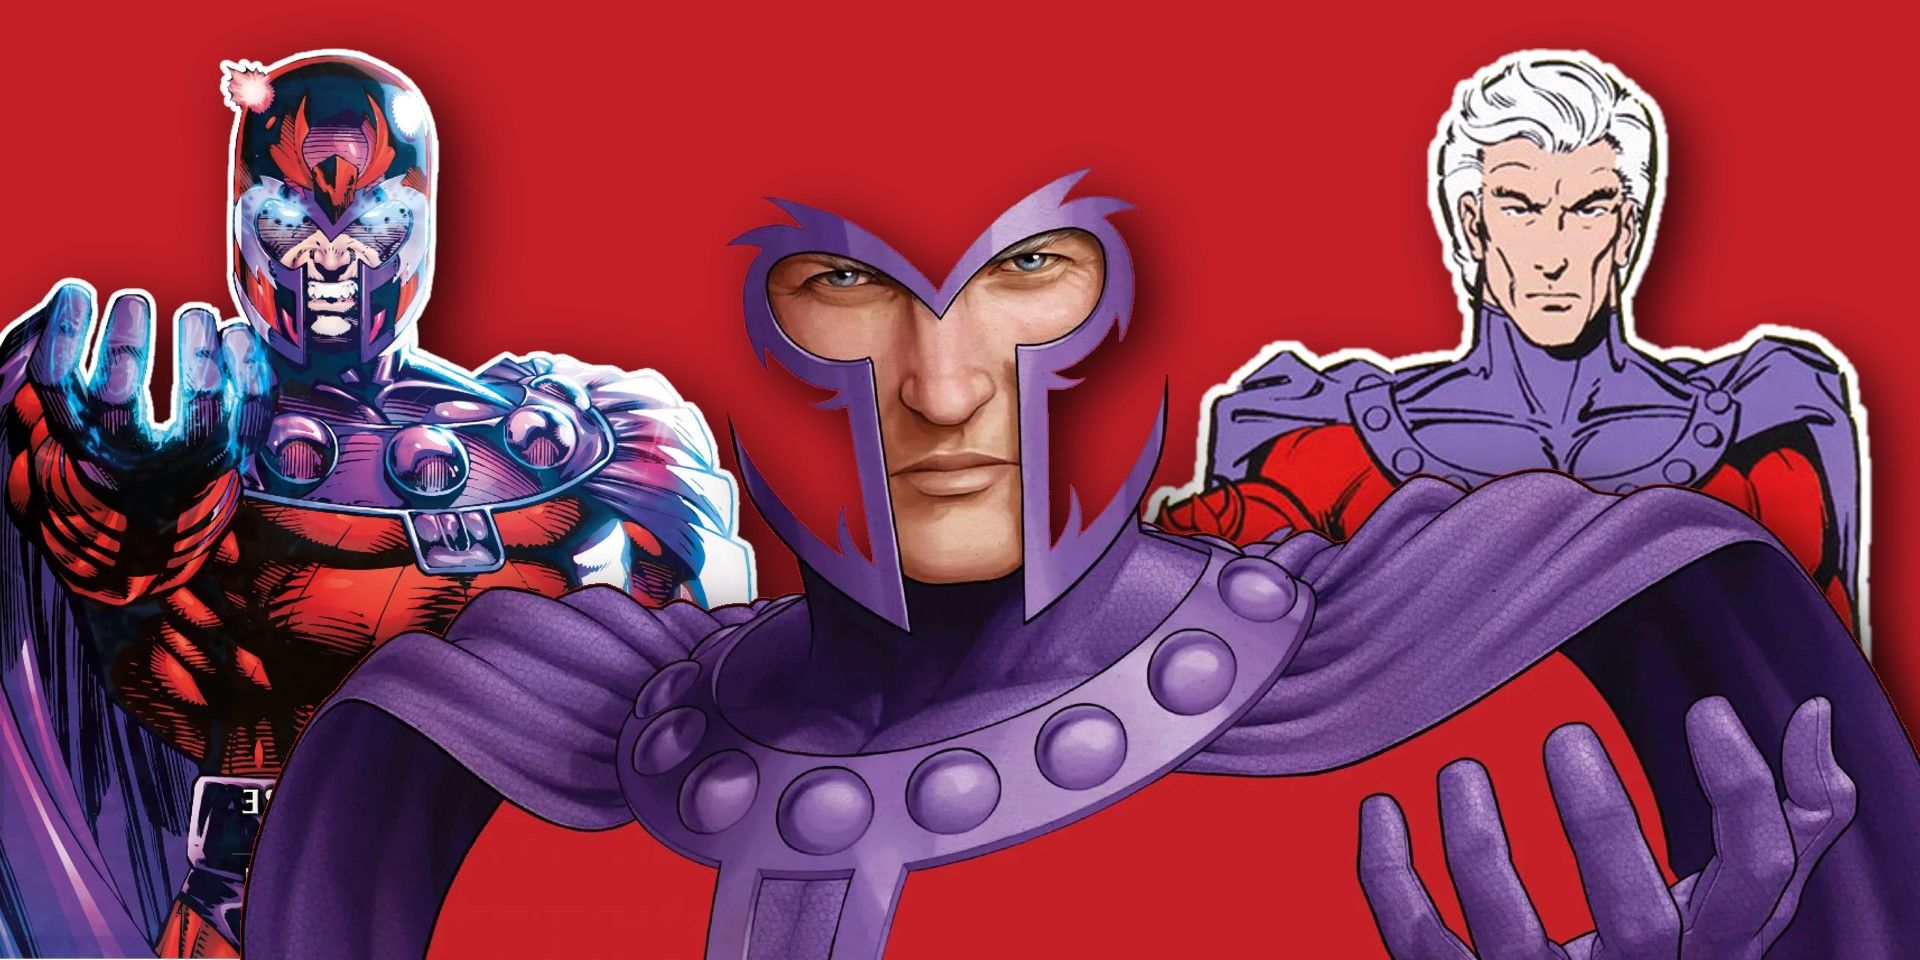 Magneto Negative Space with classic Fatal Attractions